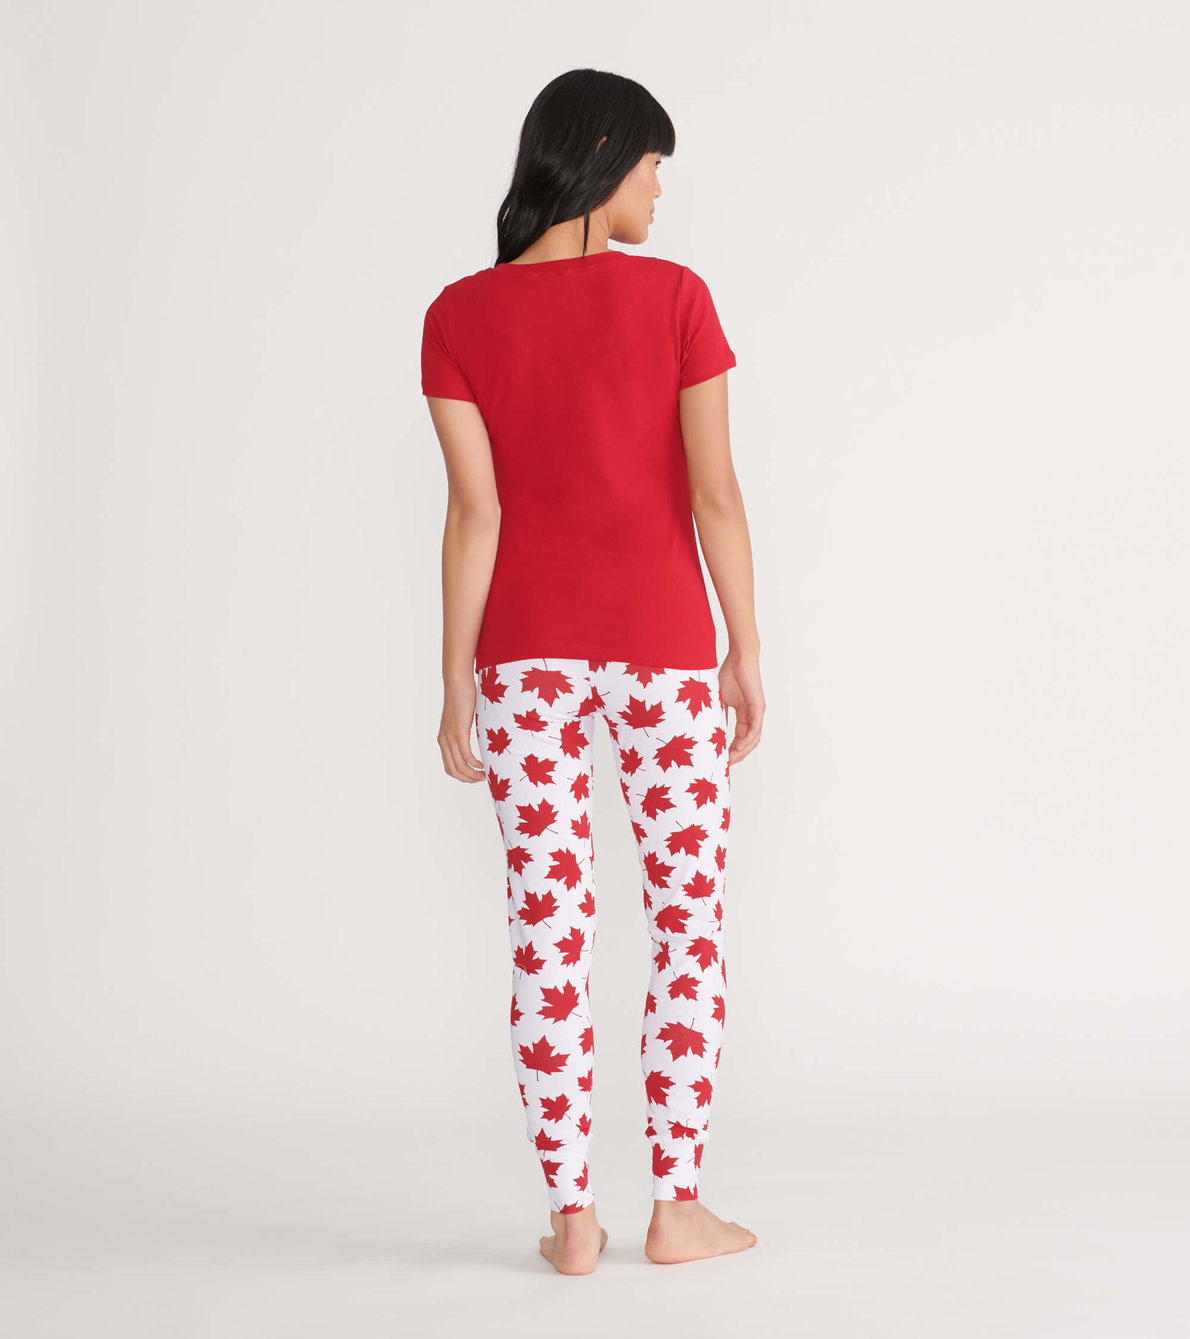 View larger image of Made in Canada Women’s Sleep Leggings